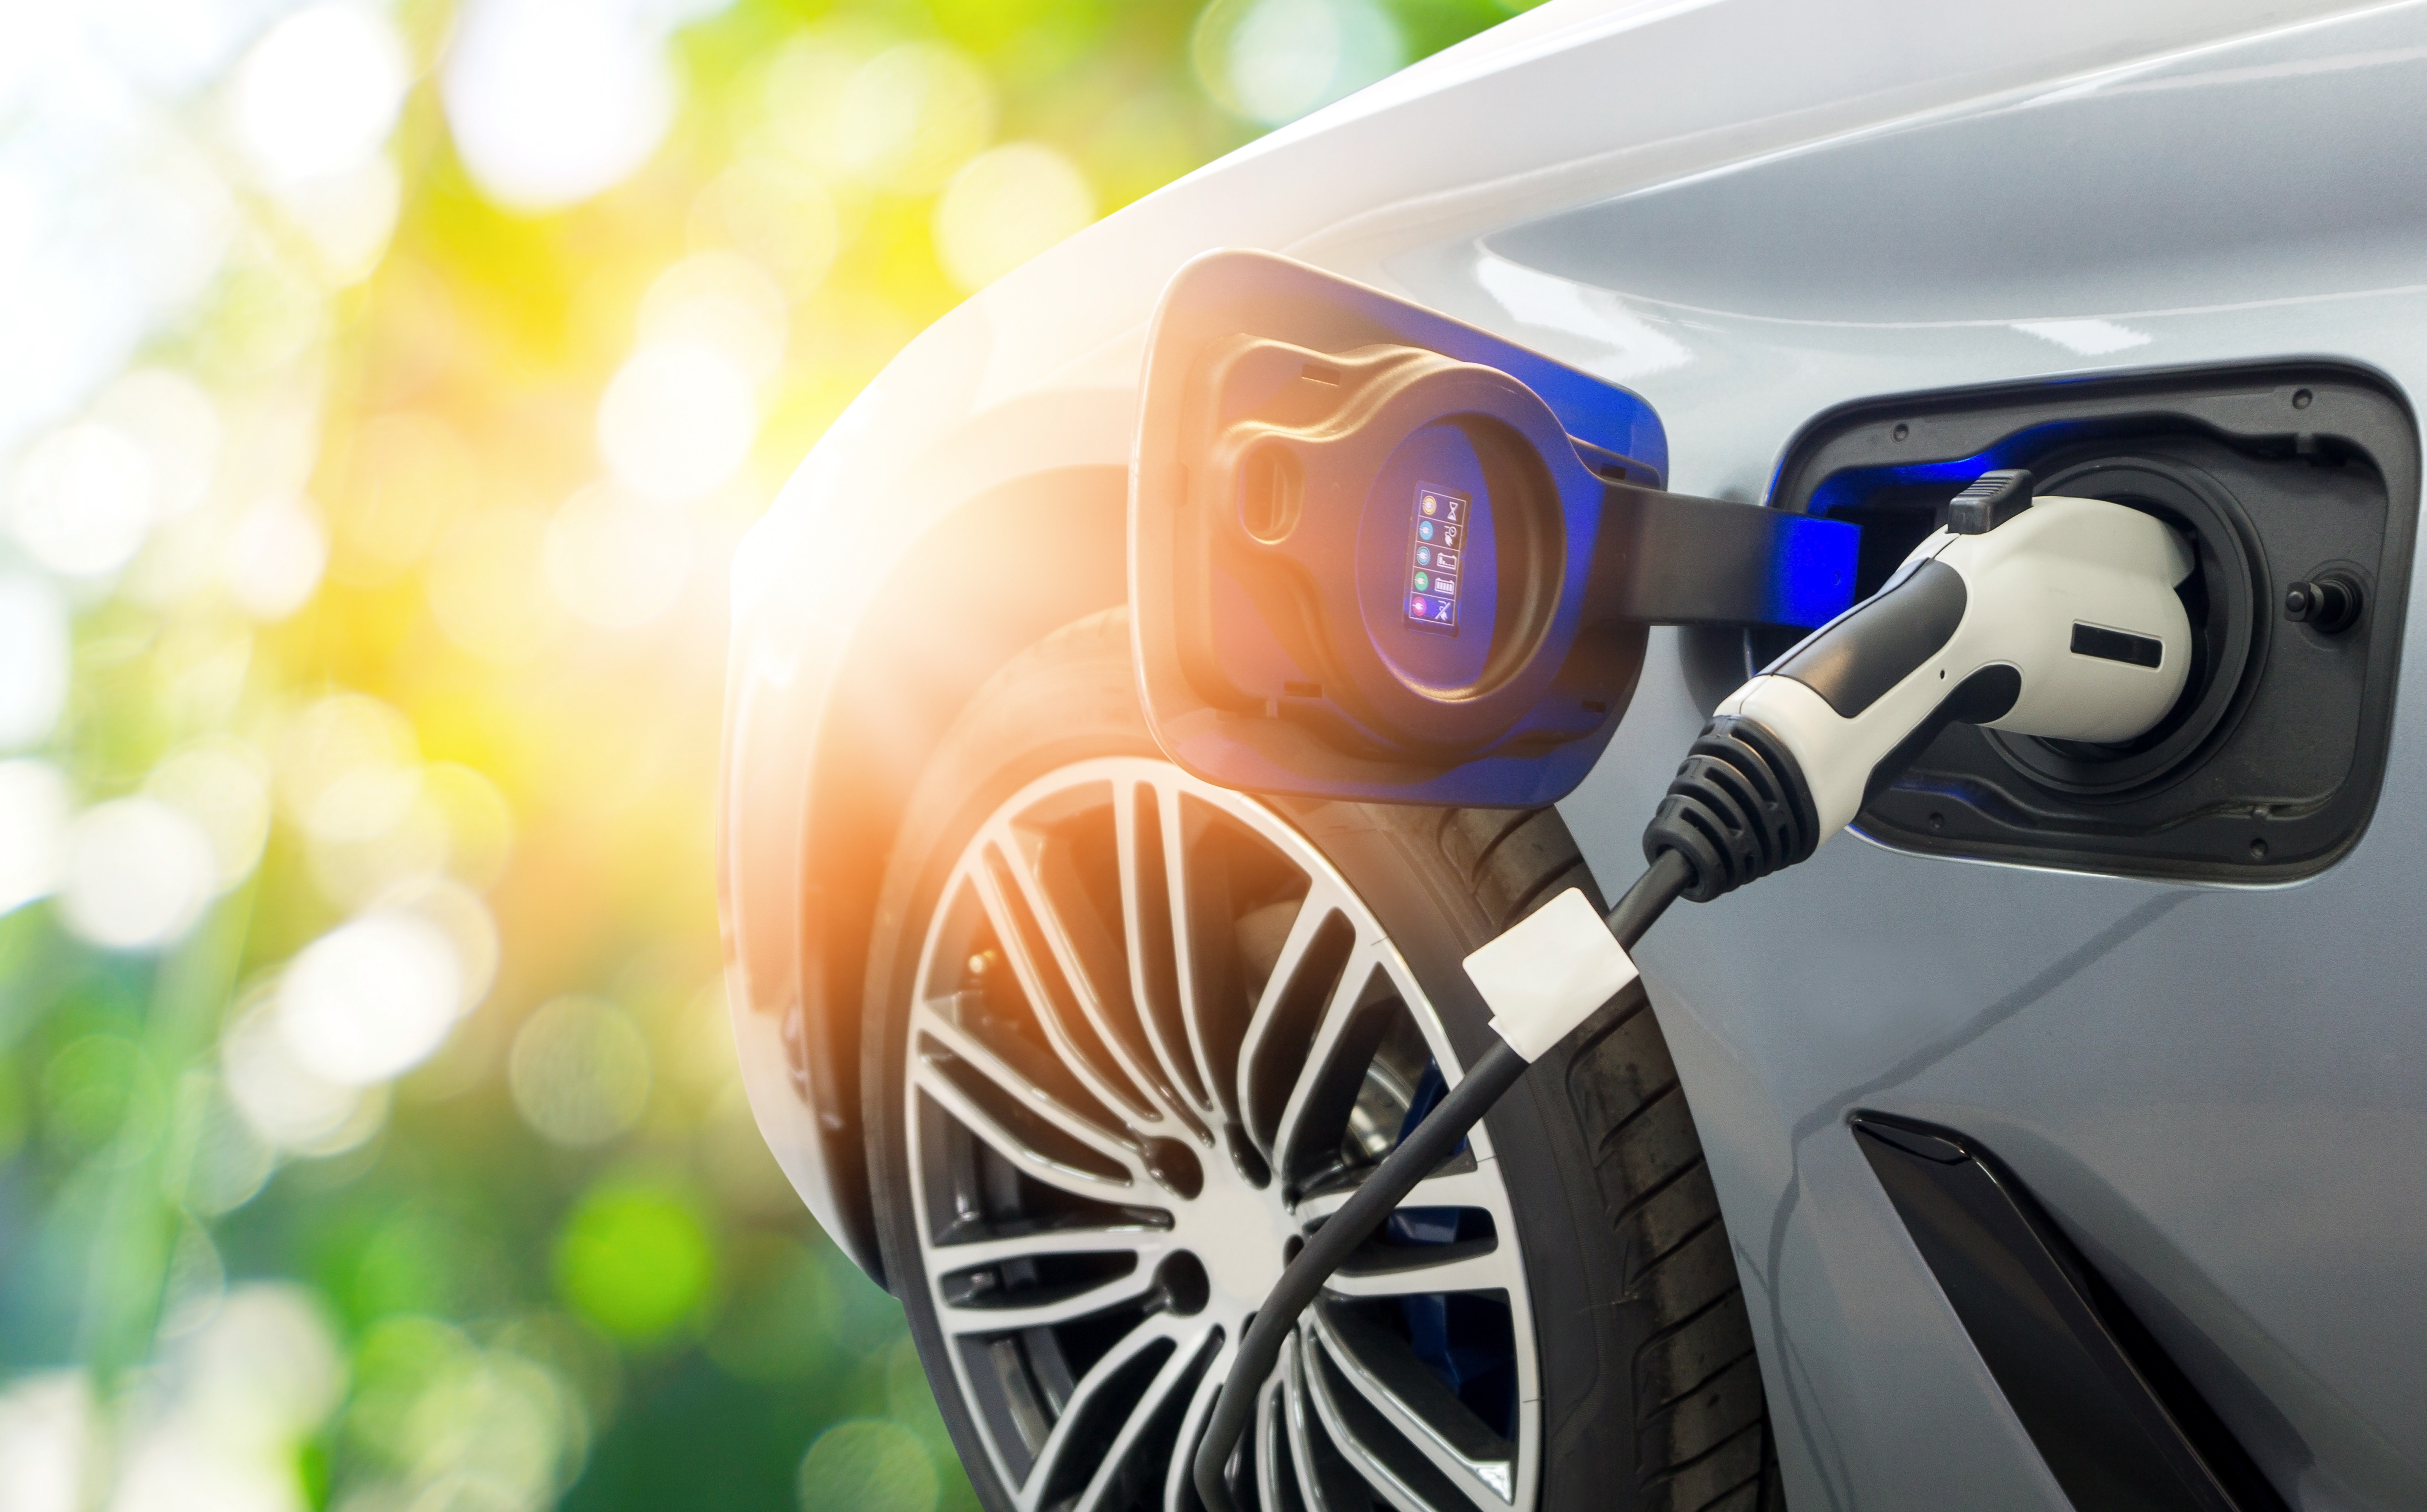 Data compiled in April suggests Hong Kong has an estimated 882 electric vehicle charging locations, offering 2,242 individual chargers across Hong Kong Island, Kowloon and the New Territories.